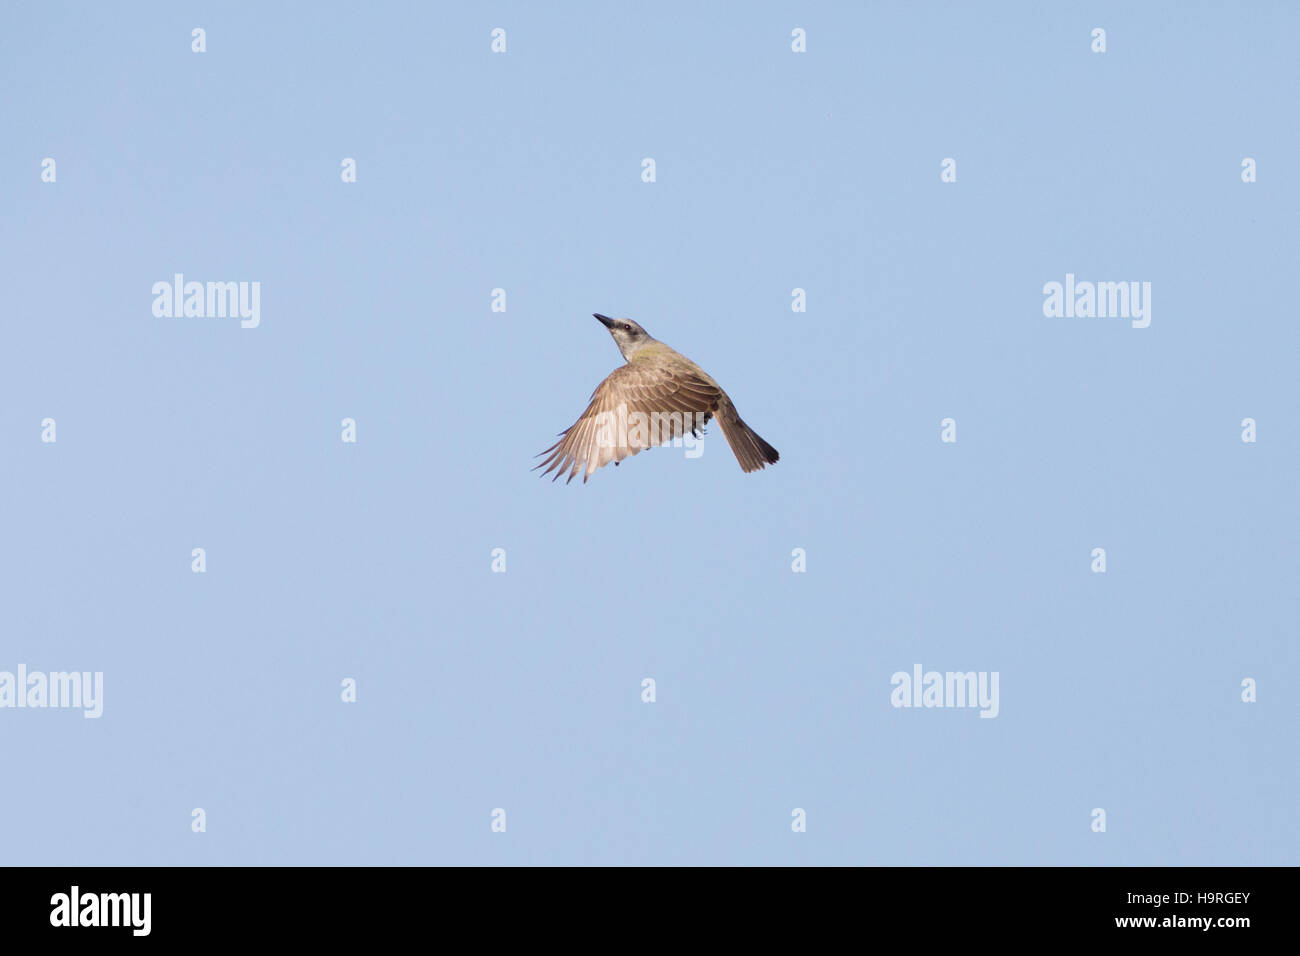 Asuncion, Paraguay. 25th November, 2016. A tropical kingbird (Tyrannus melancholicus) flycatching insects in the air, is seen during sunny day in Asuncion, Paraguay. Credit: Andre M. Chang/Alamy Live News Stock Photo